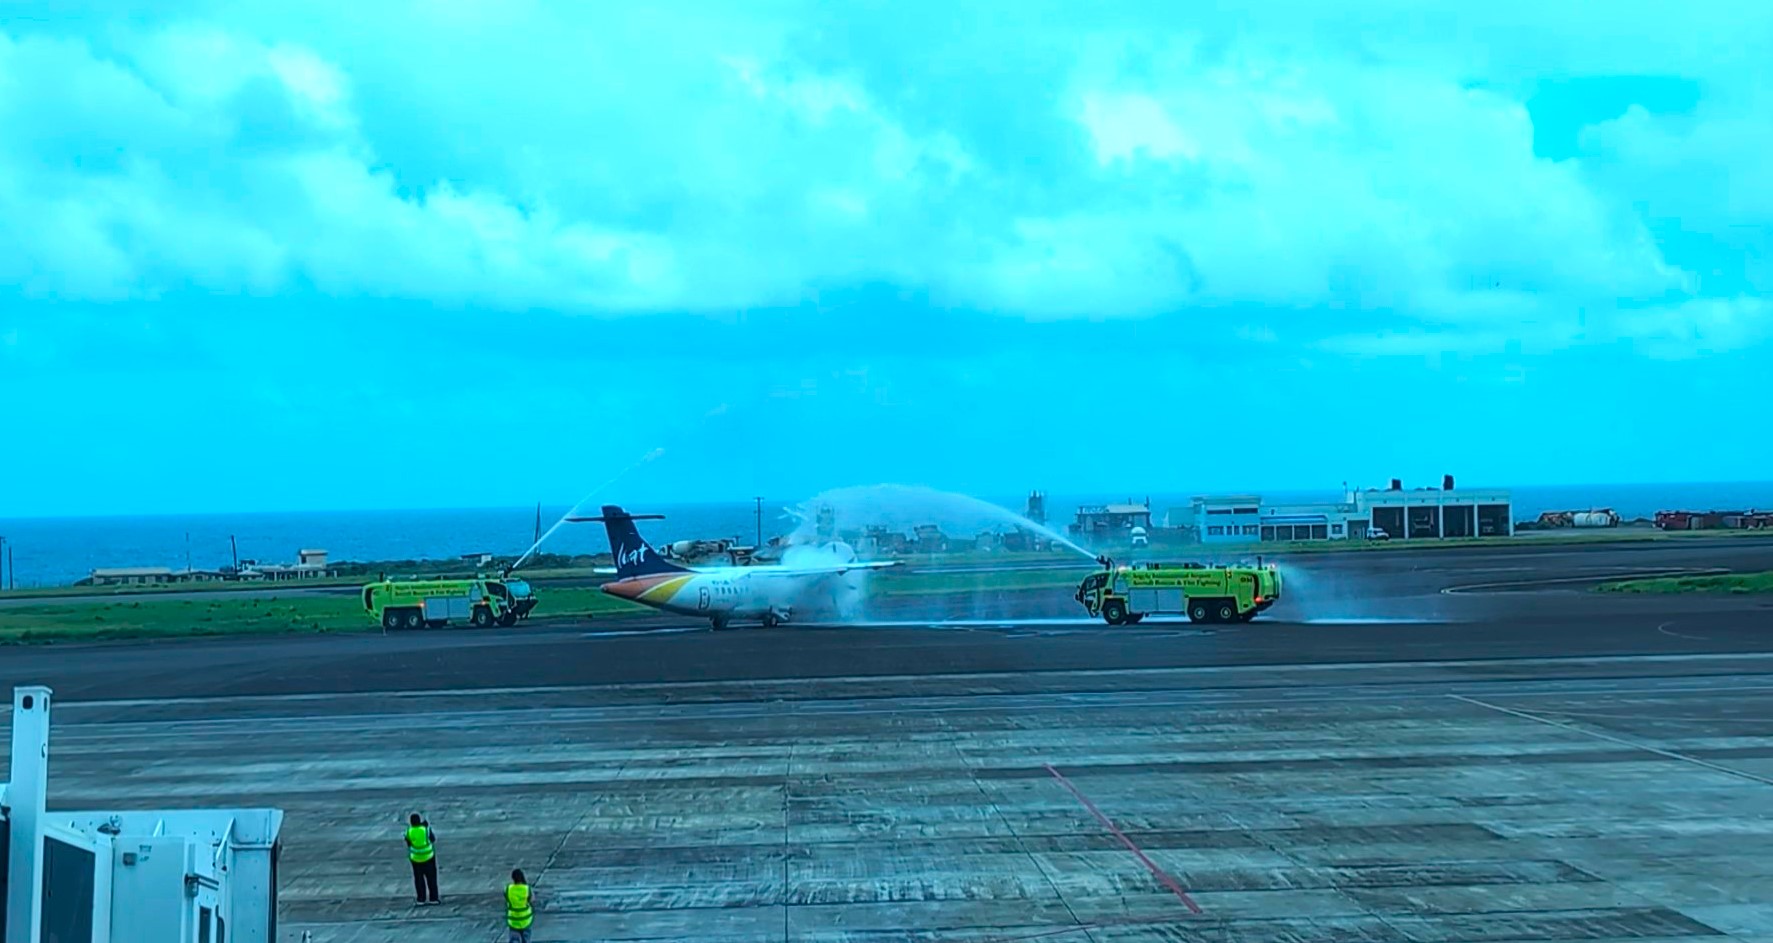 LIAT 1974 Ltd  Ends Its  50 Years  Journey  With  Final  Voyage  Of  Sole  ATR 42-600  Aircraft.